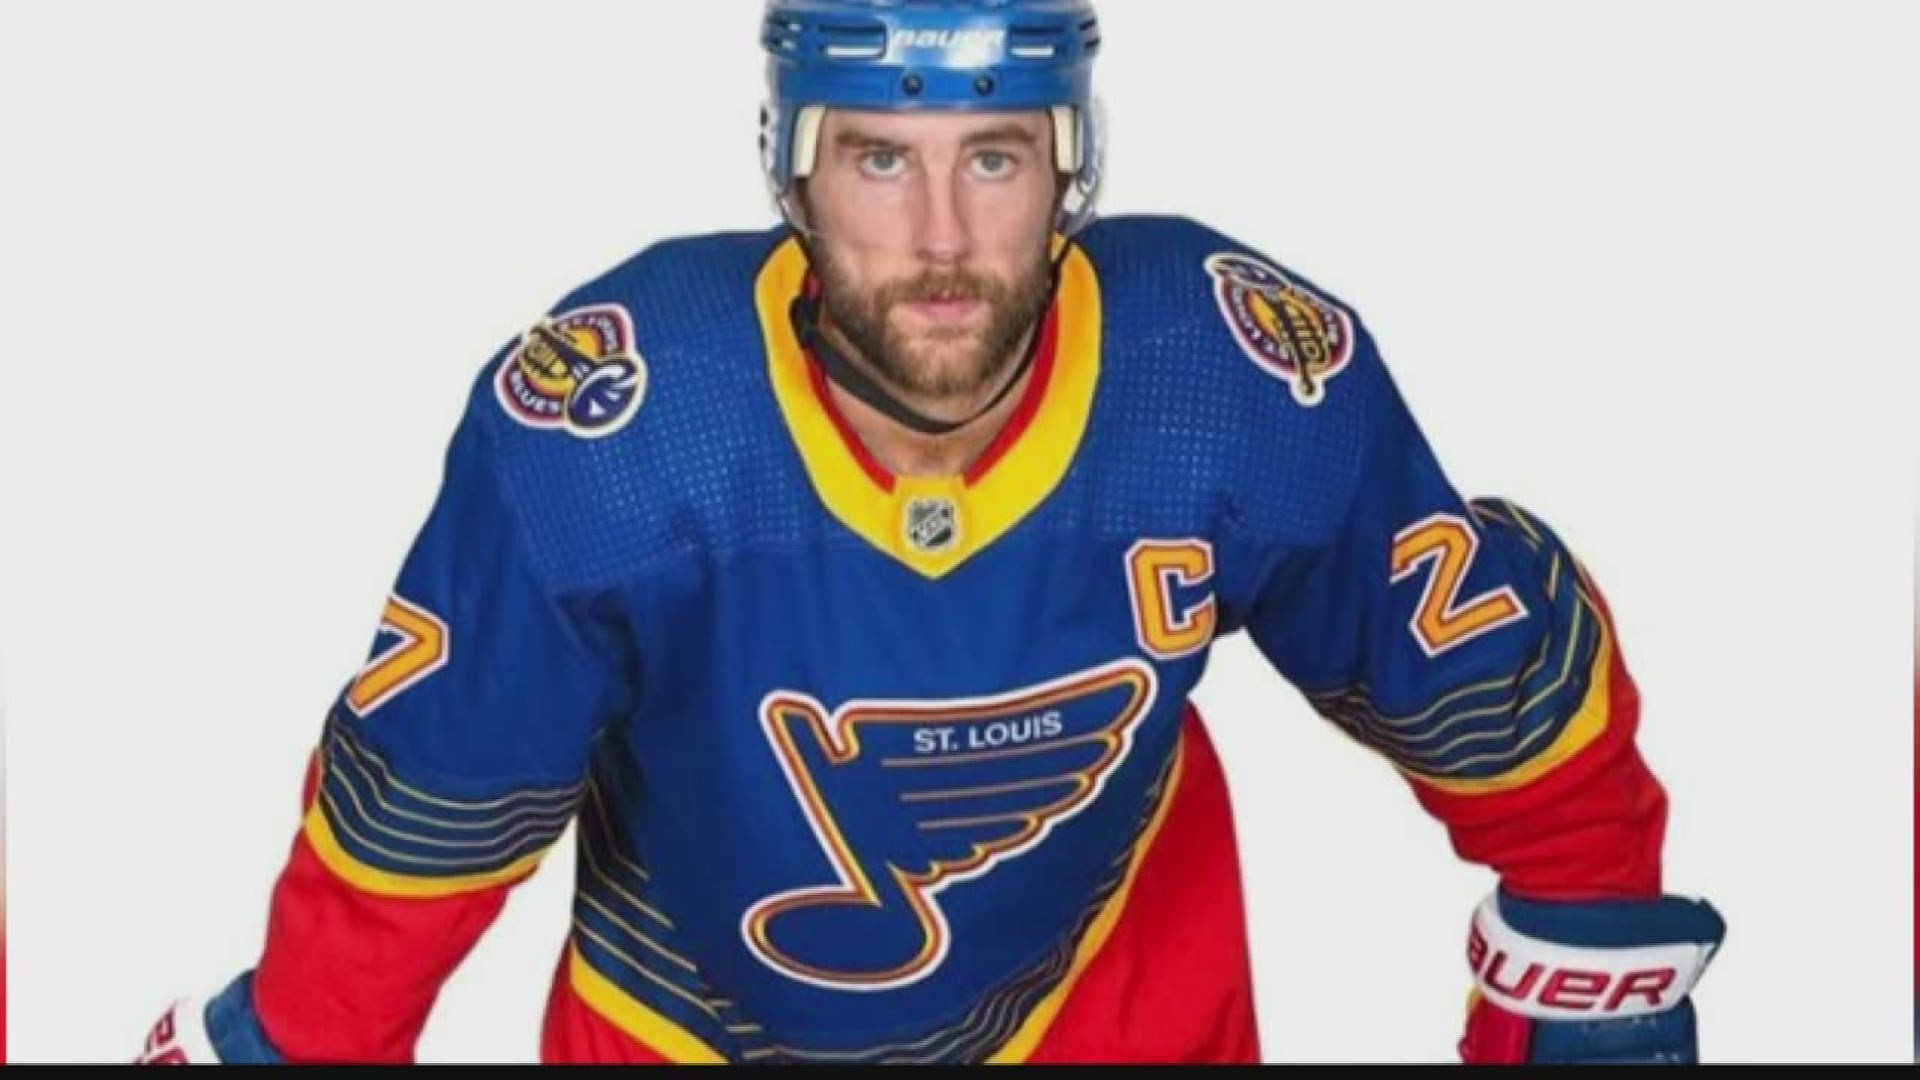 The Blues are unveiling a new jersey on September 14th. Will it be